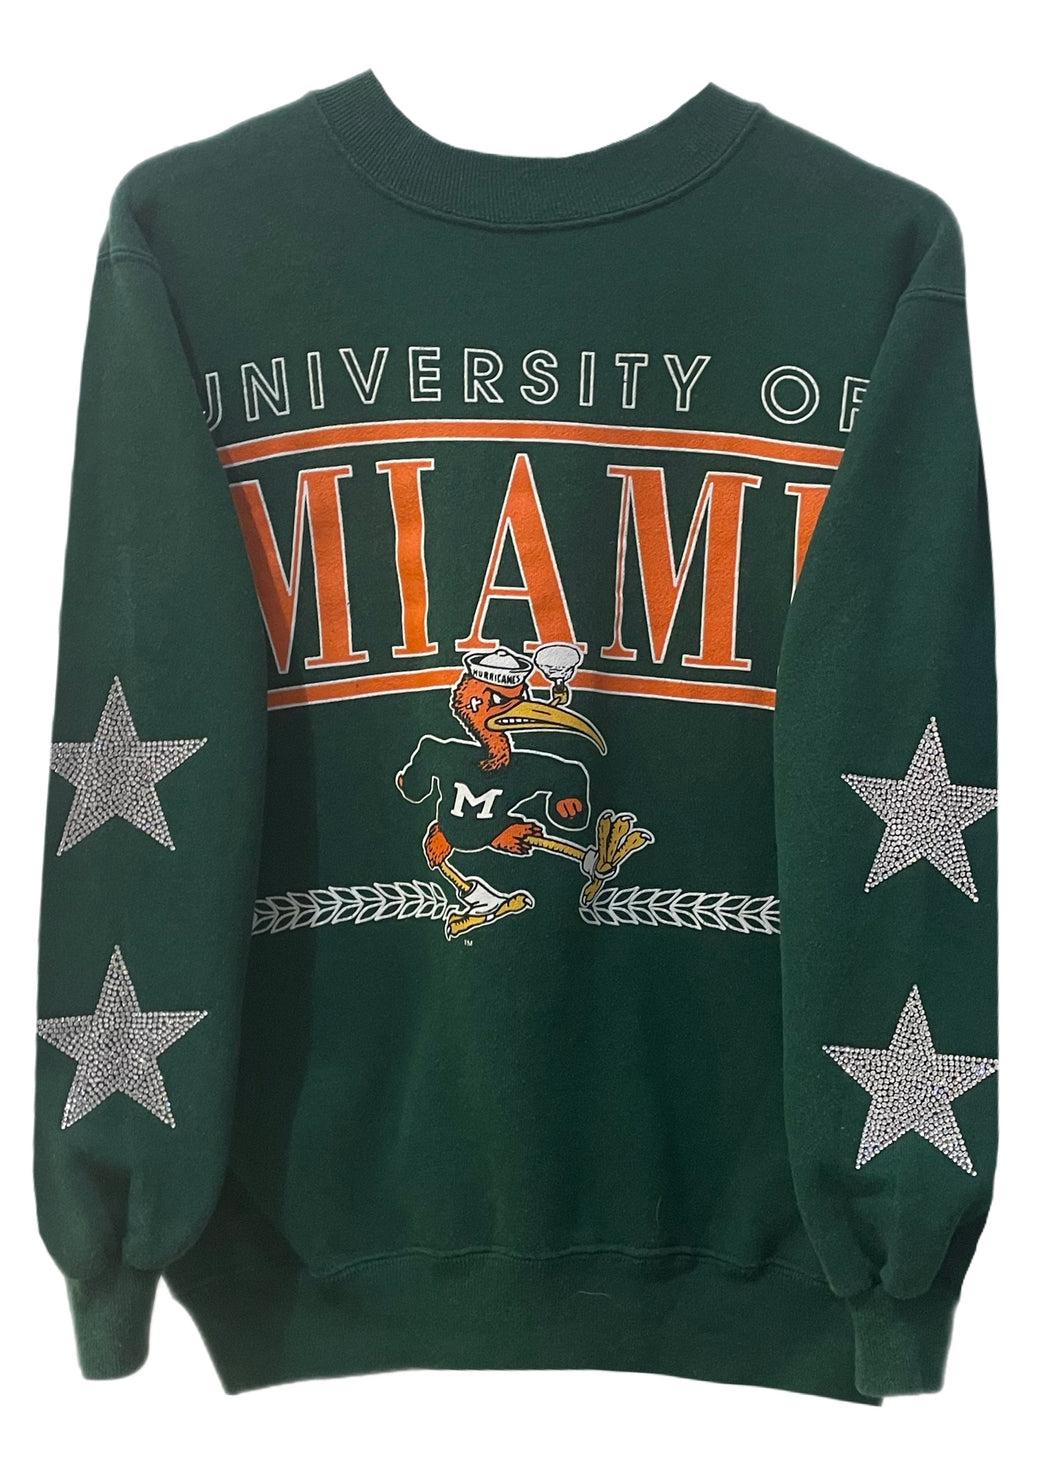 University of Miami, One of a KIND Vintage Miami Hurricanes Sweatshirt with Crystal Star Design